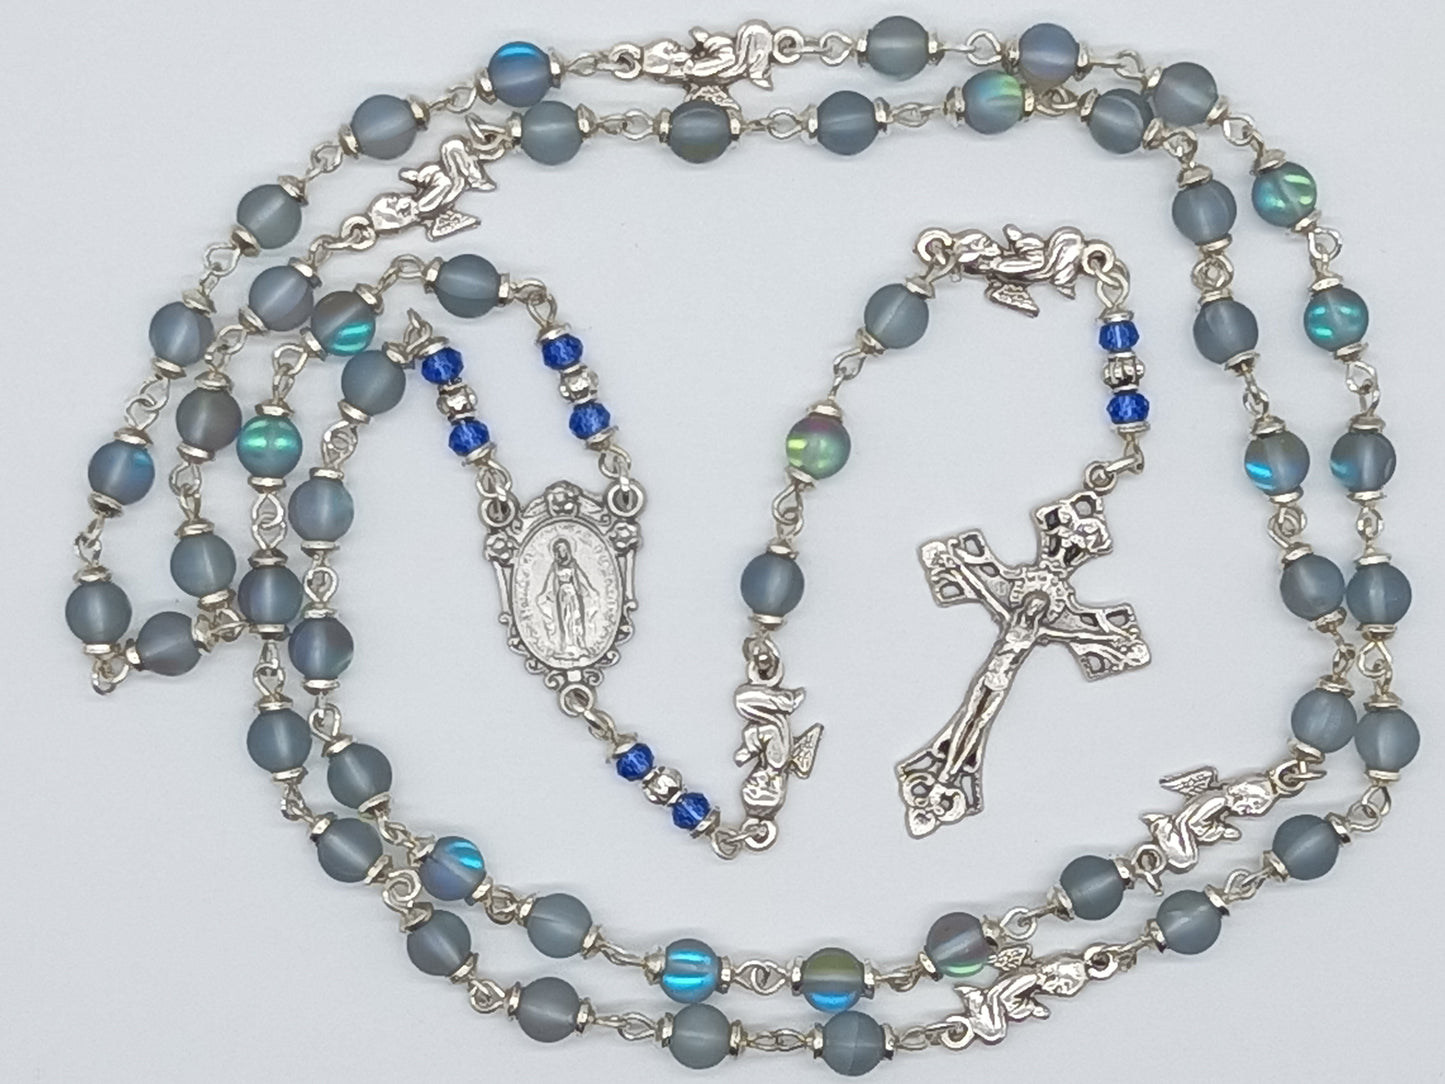 Guardian Angel Crystal Rosary beads, Miraculous medal Rosary, Handmade Crystal Rosaries, Spiritual Wedding beads, Miraculous medal beads.